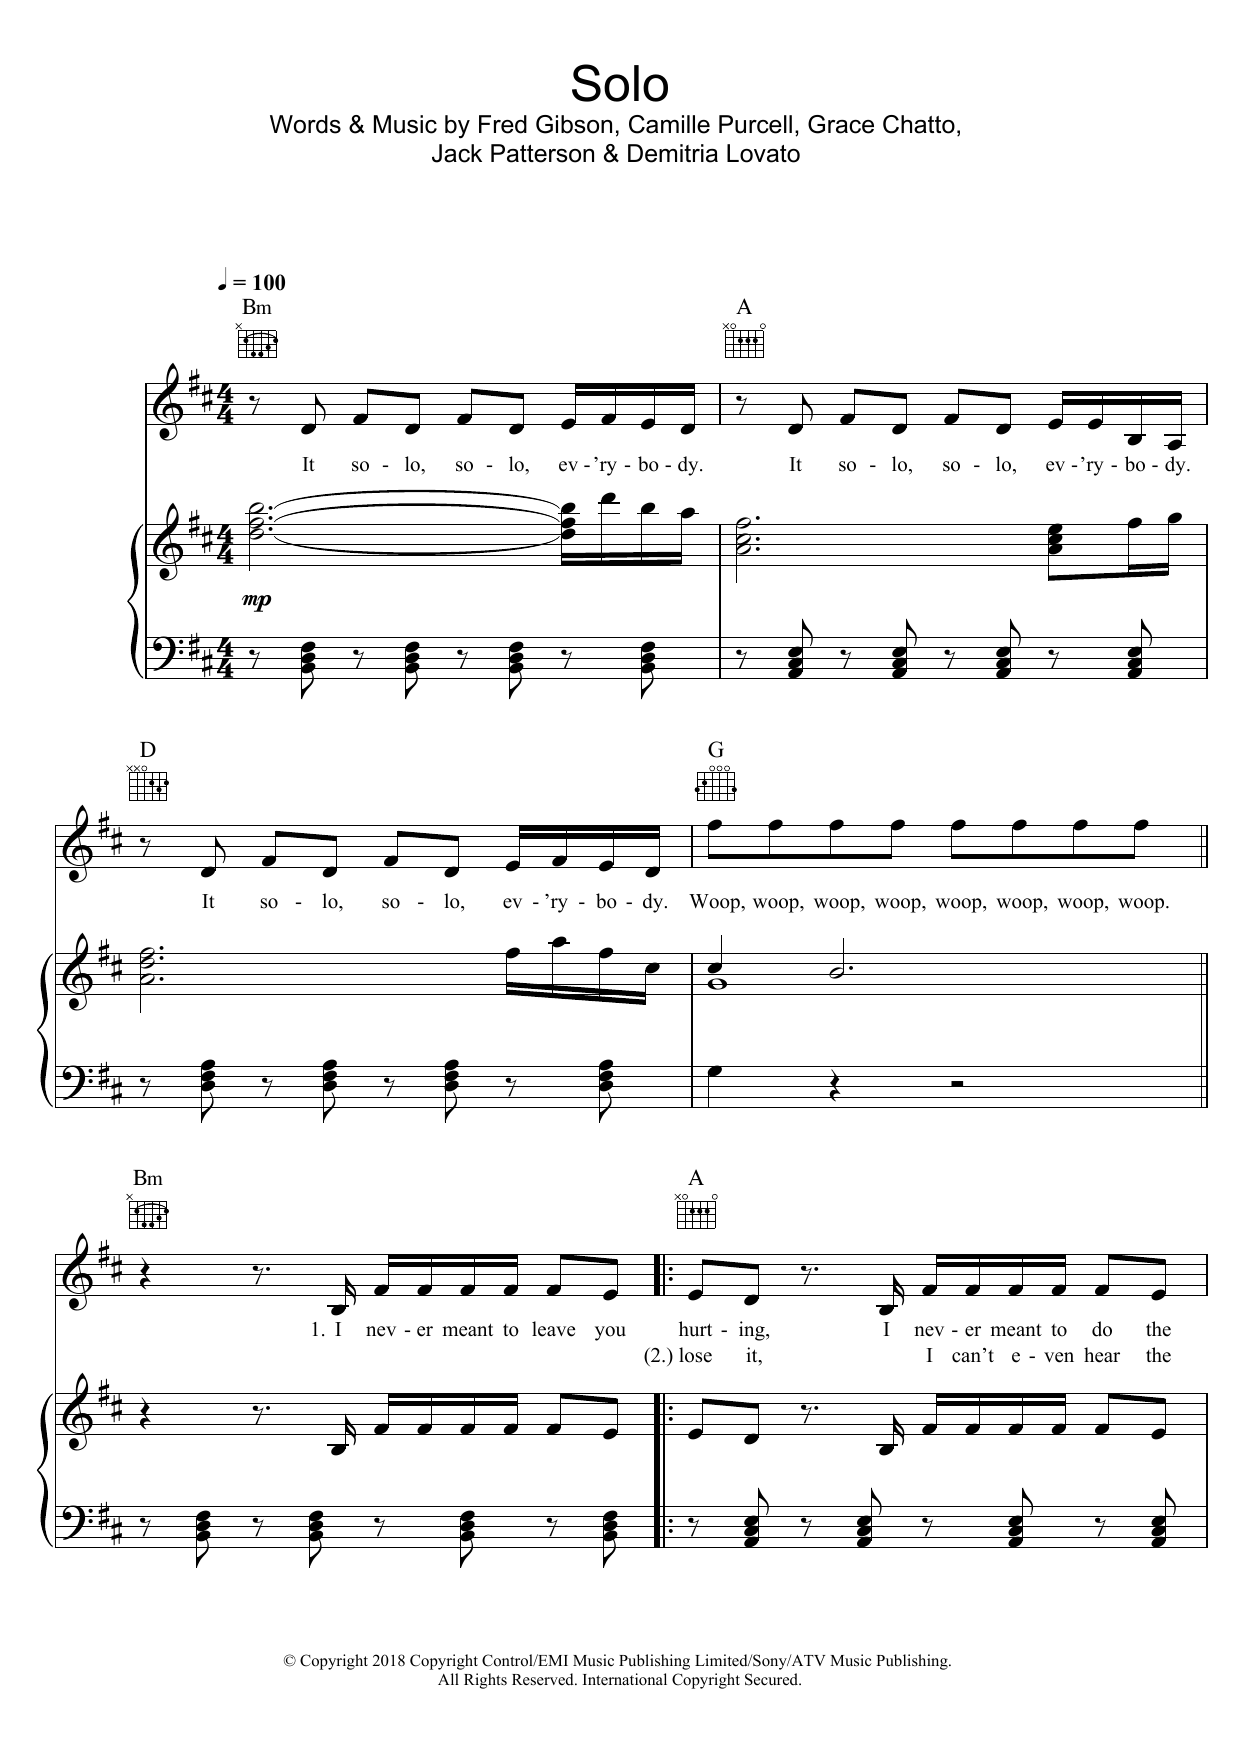 Download Clean Bandit Solo (featuring Demi Lovato) Sheet Music